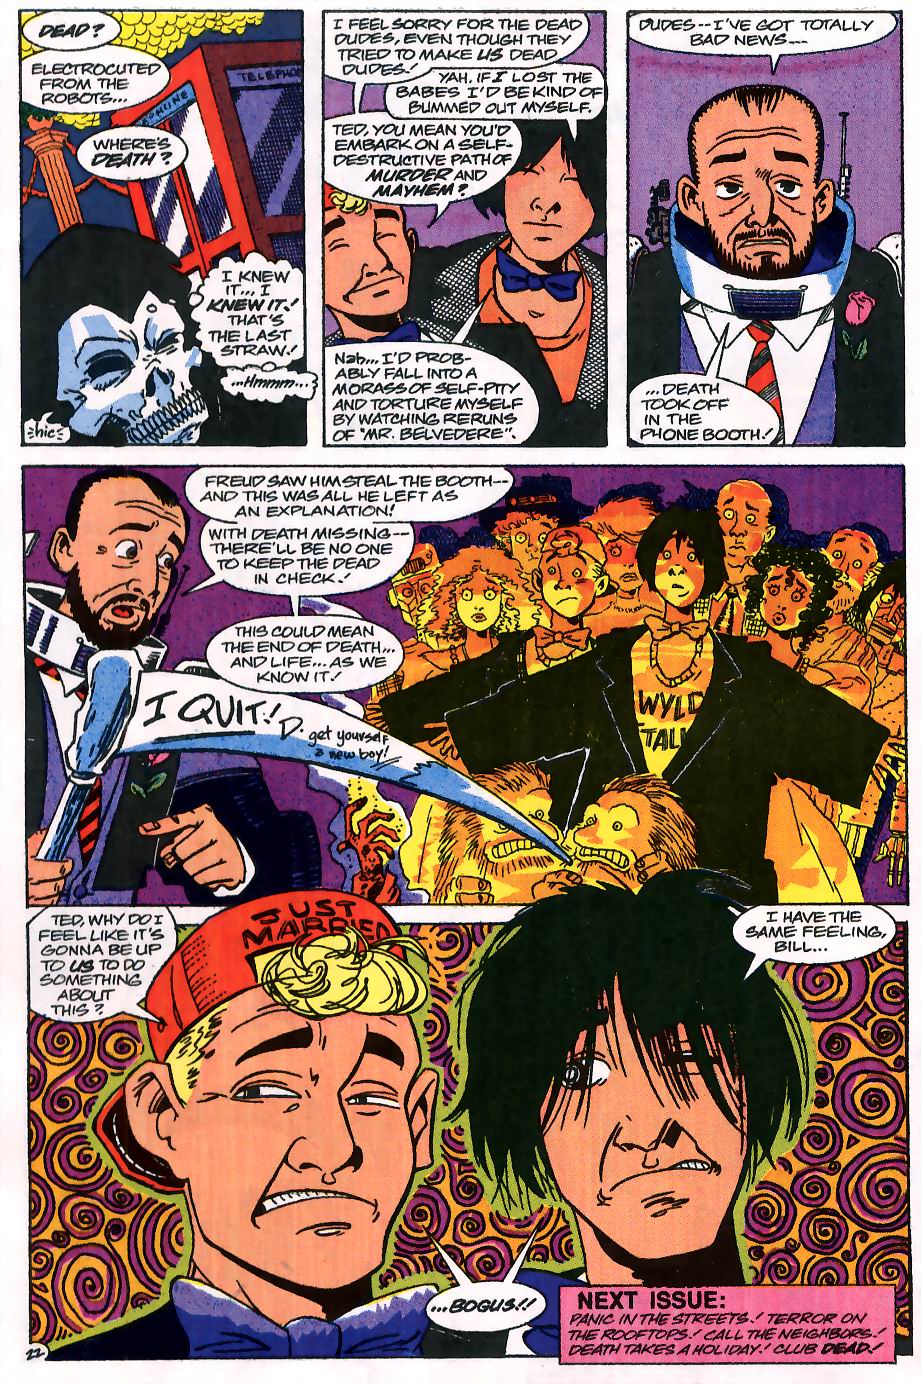 Read online Bill & Ted's Excellent Comic Book comic -  Issue #1 - 23